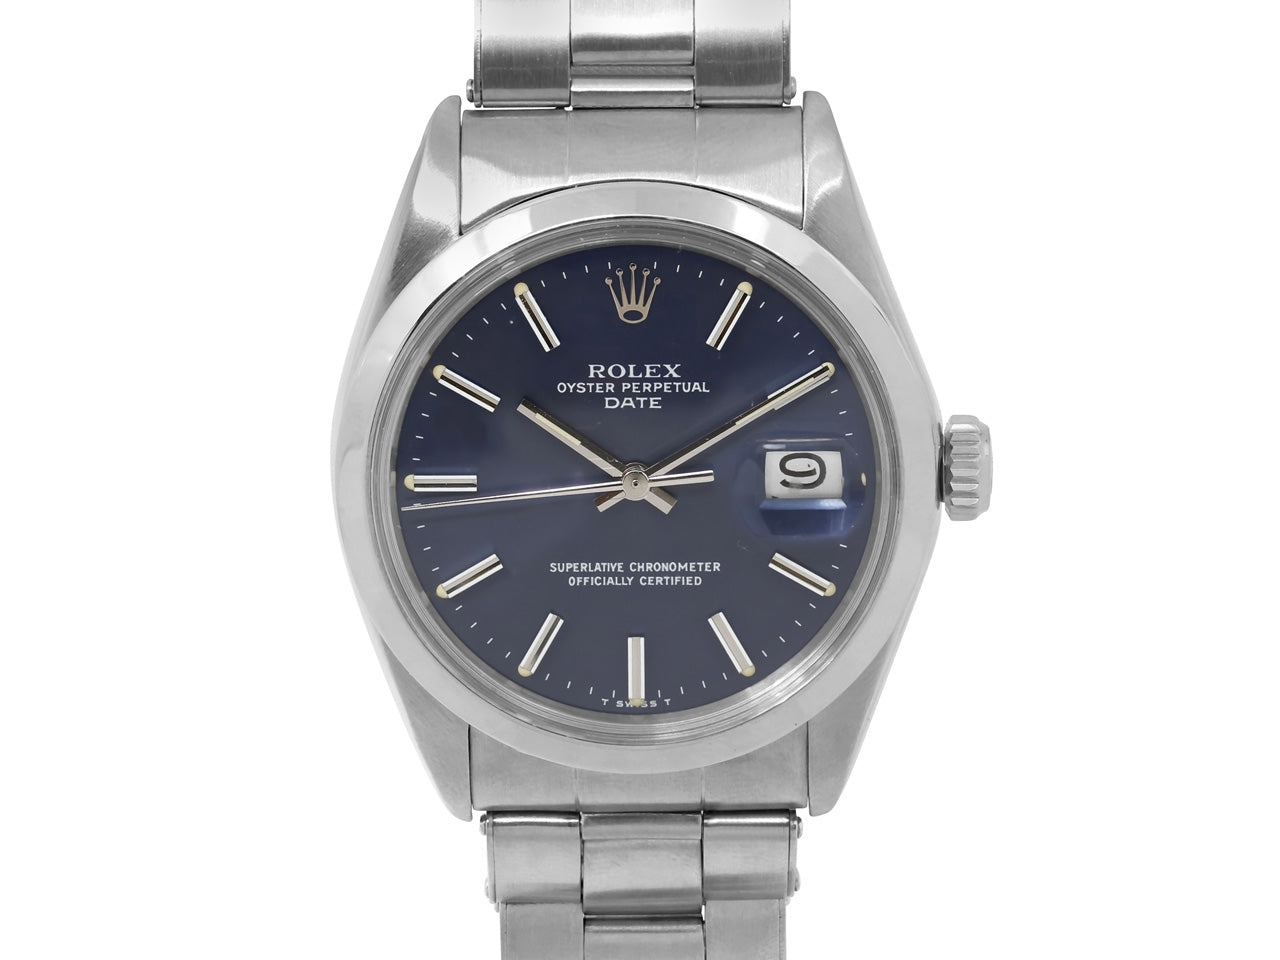 Oyster Perpetual Date Watch in Stainless Steel #515699 –